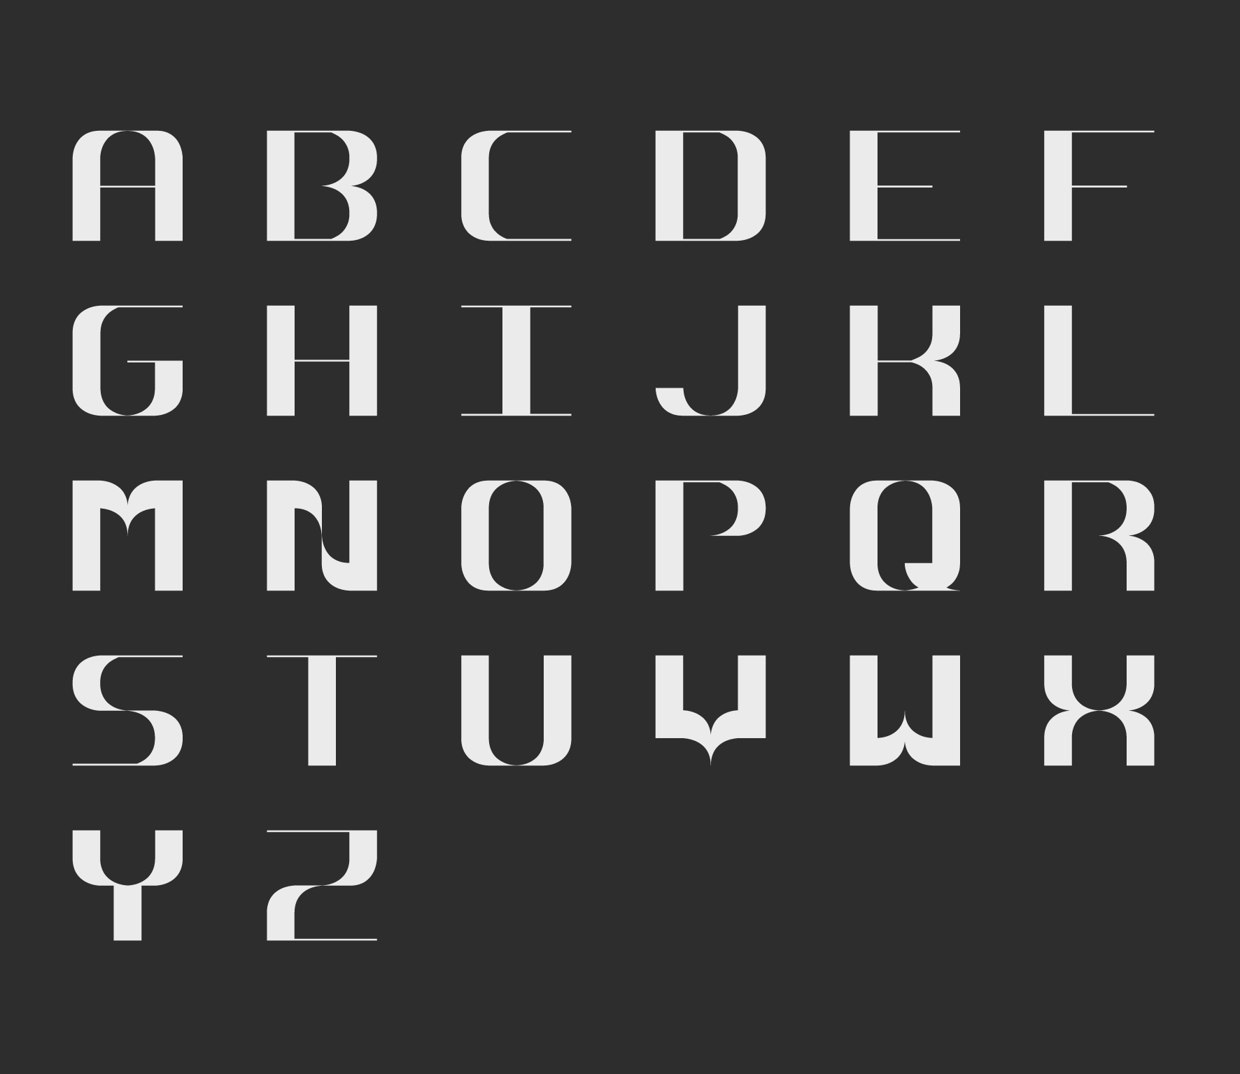 Commercial font. Шрифт roboto Black. Шрифт roboto Condensed Regular. Шрифт 1#. Шрифт roboto Condensed.